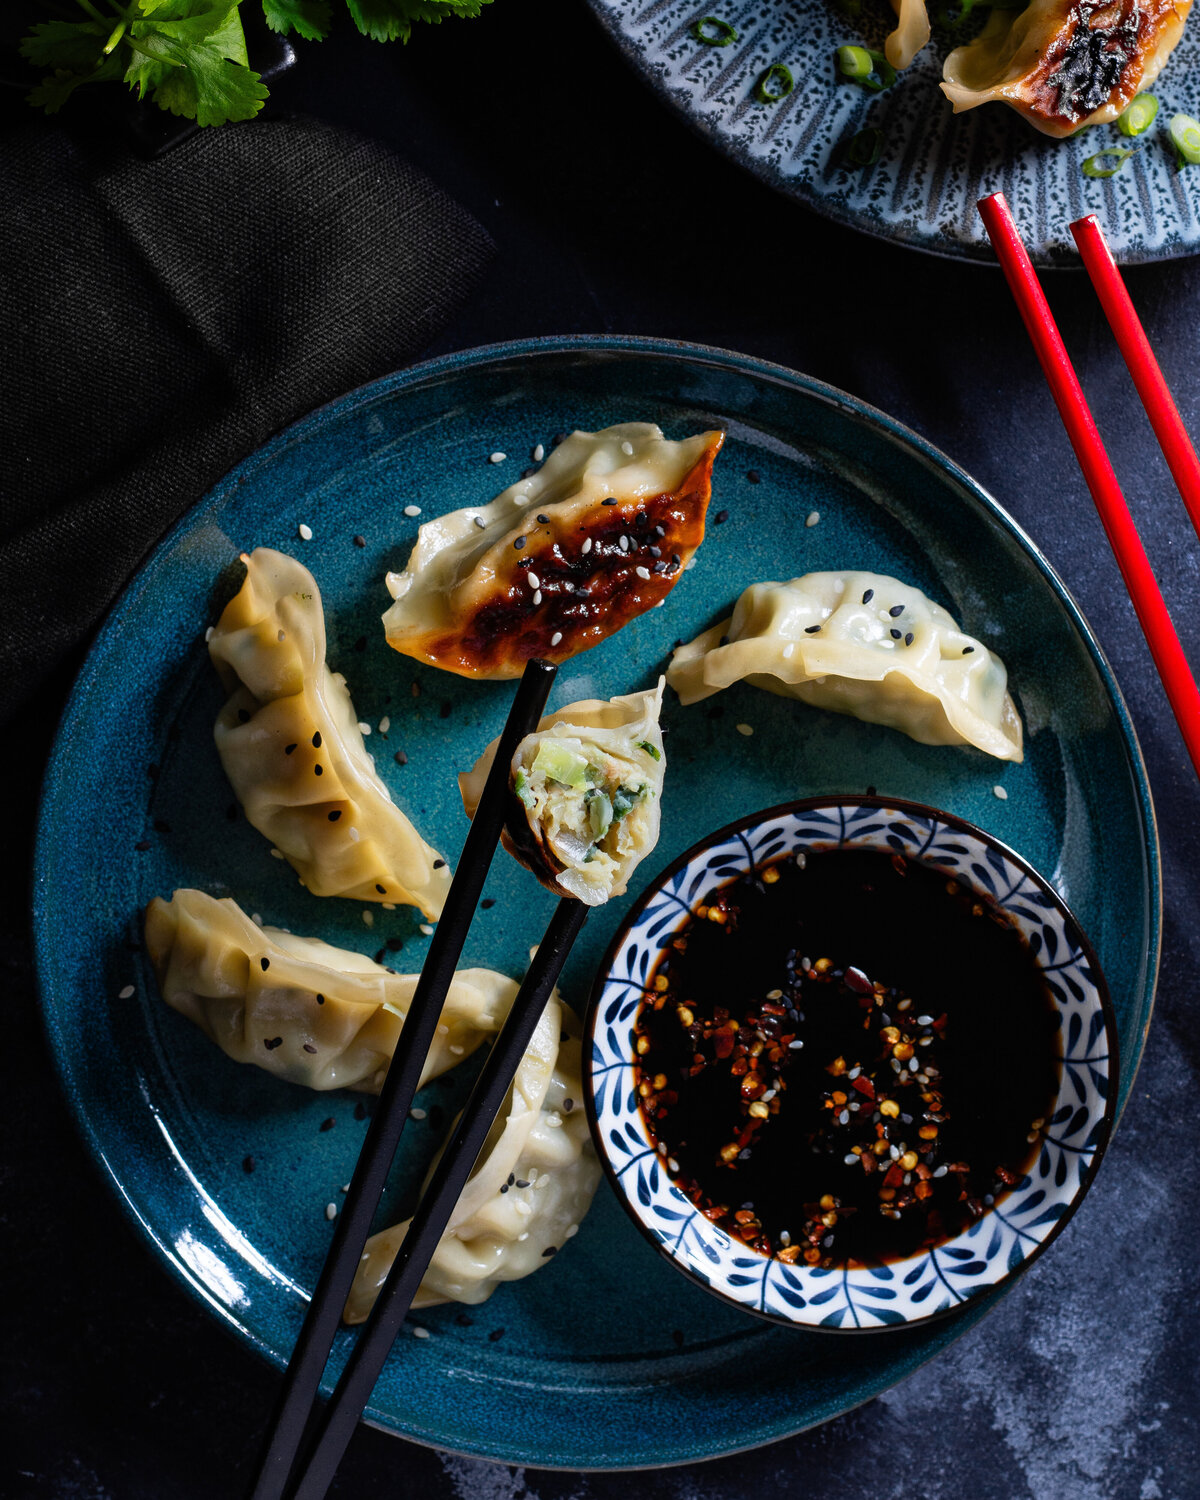 Chicken and vegetable gyoza  held by chopsticks with a plate of gyoza and dipping sauce